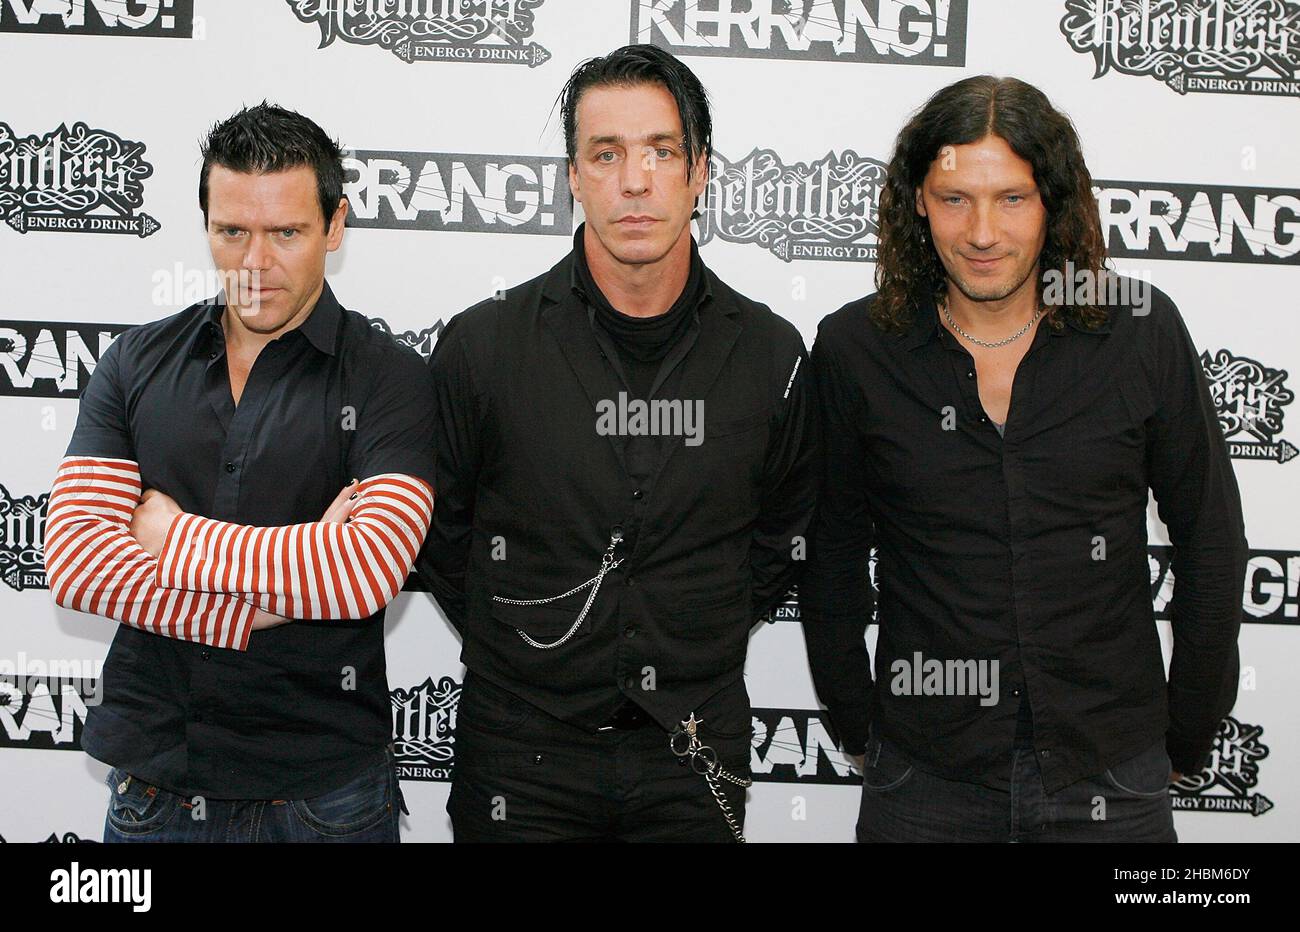 Rammstein arrive at the The Relentless Energy Drink Kerrang! Awards at The Brewery, London on July 29, 2010. Stock Photo